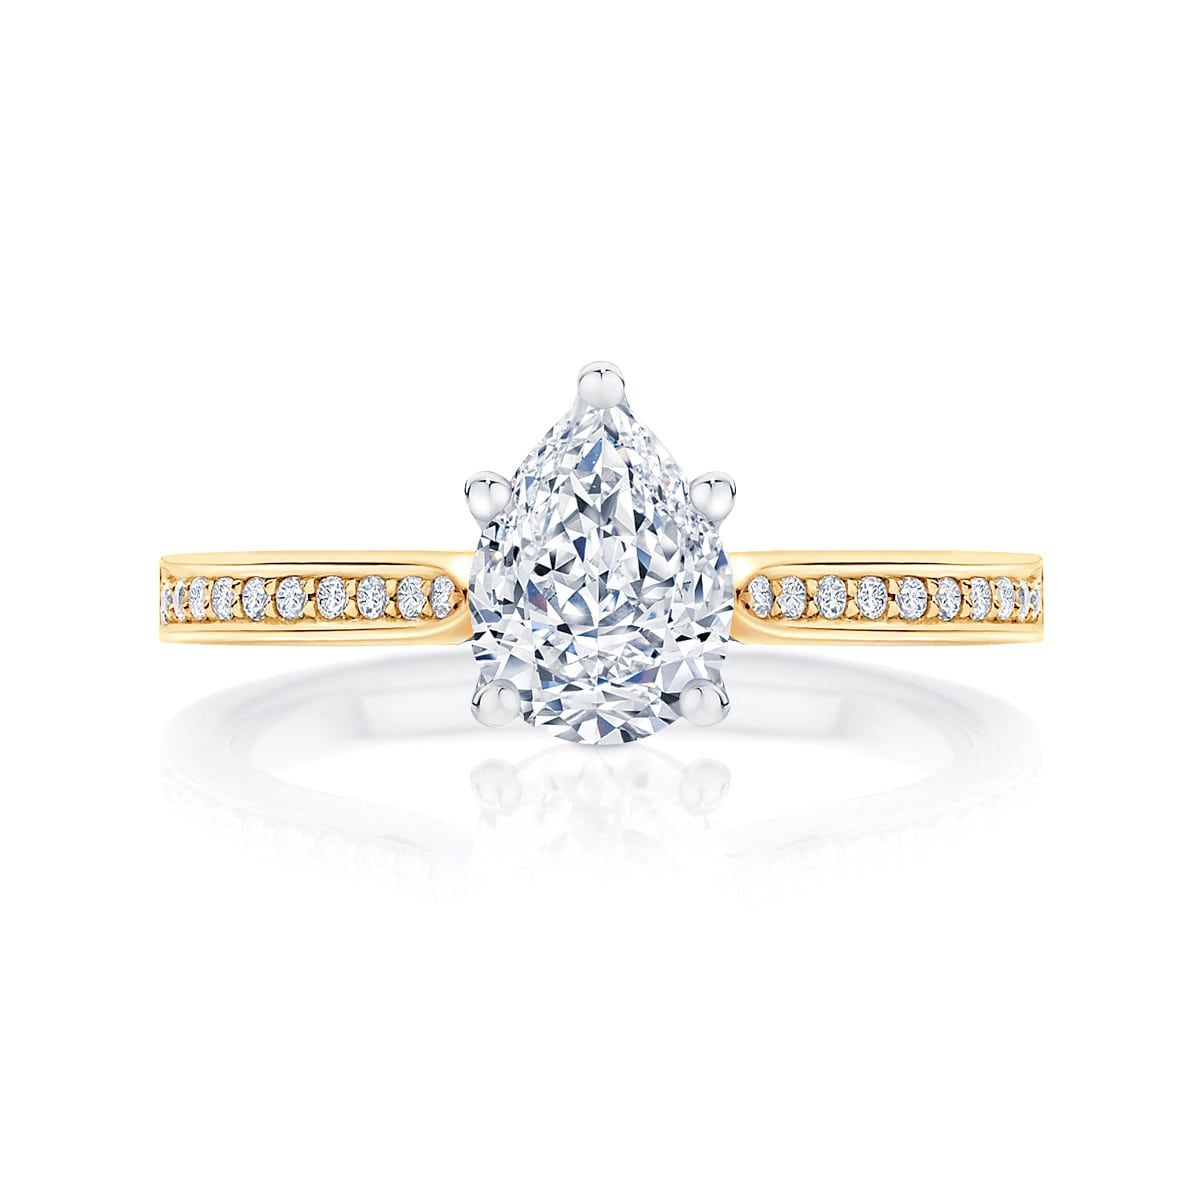 Pear diamond engagement ring yellow gold with side stones